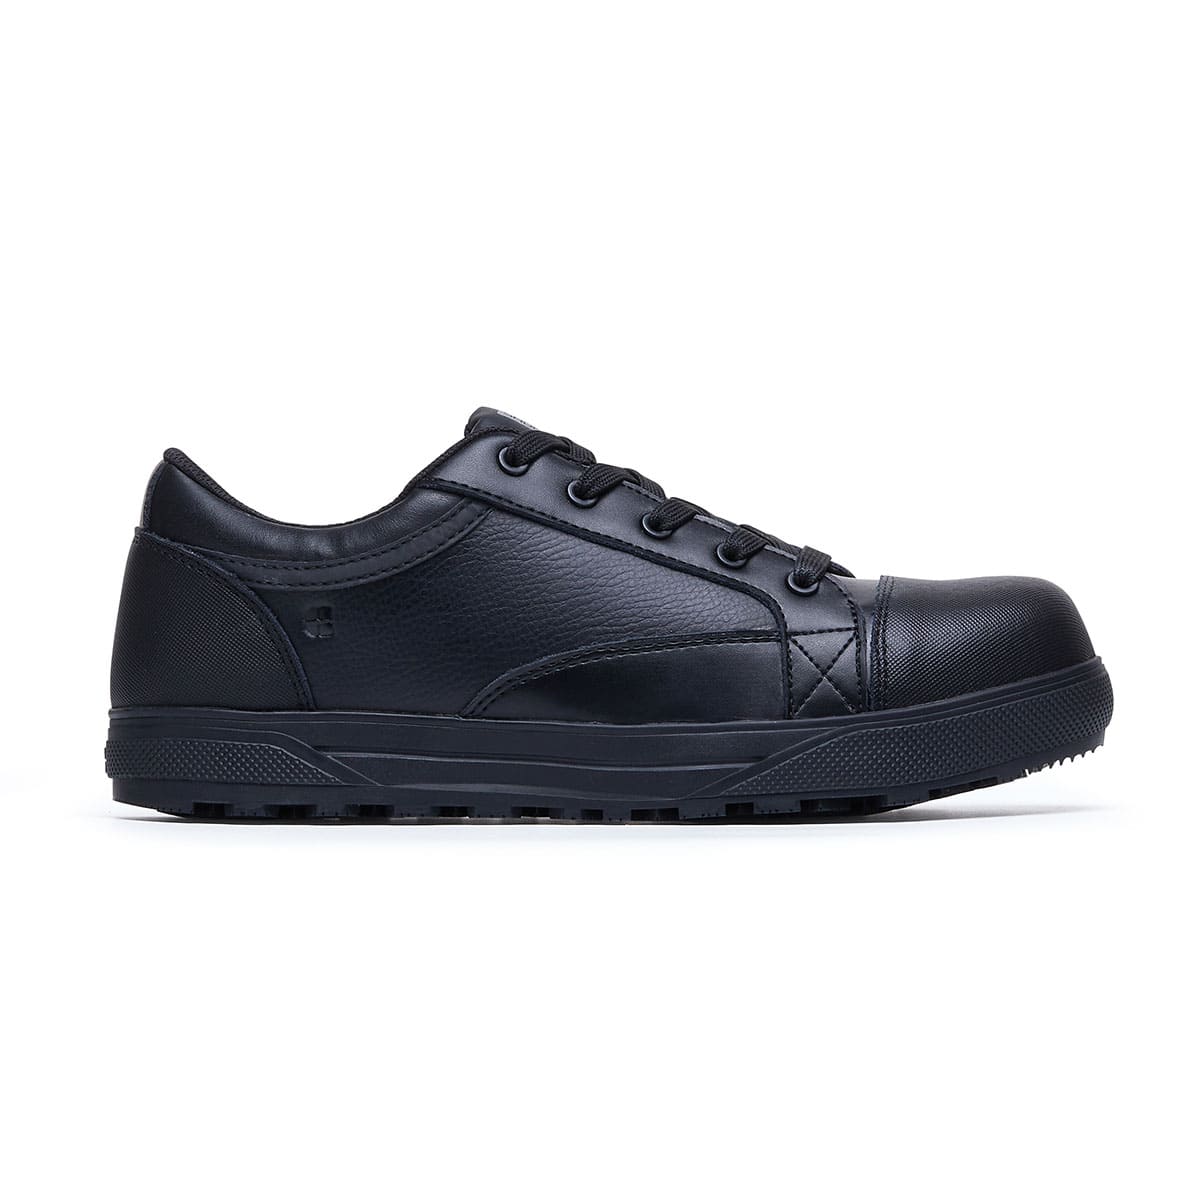 The Fergus Black from Shoes For Crews is an slip-resistant safety shoe with a waterproof leather upper and a nanocomposite toe cap (200 joules), seen from the right.